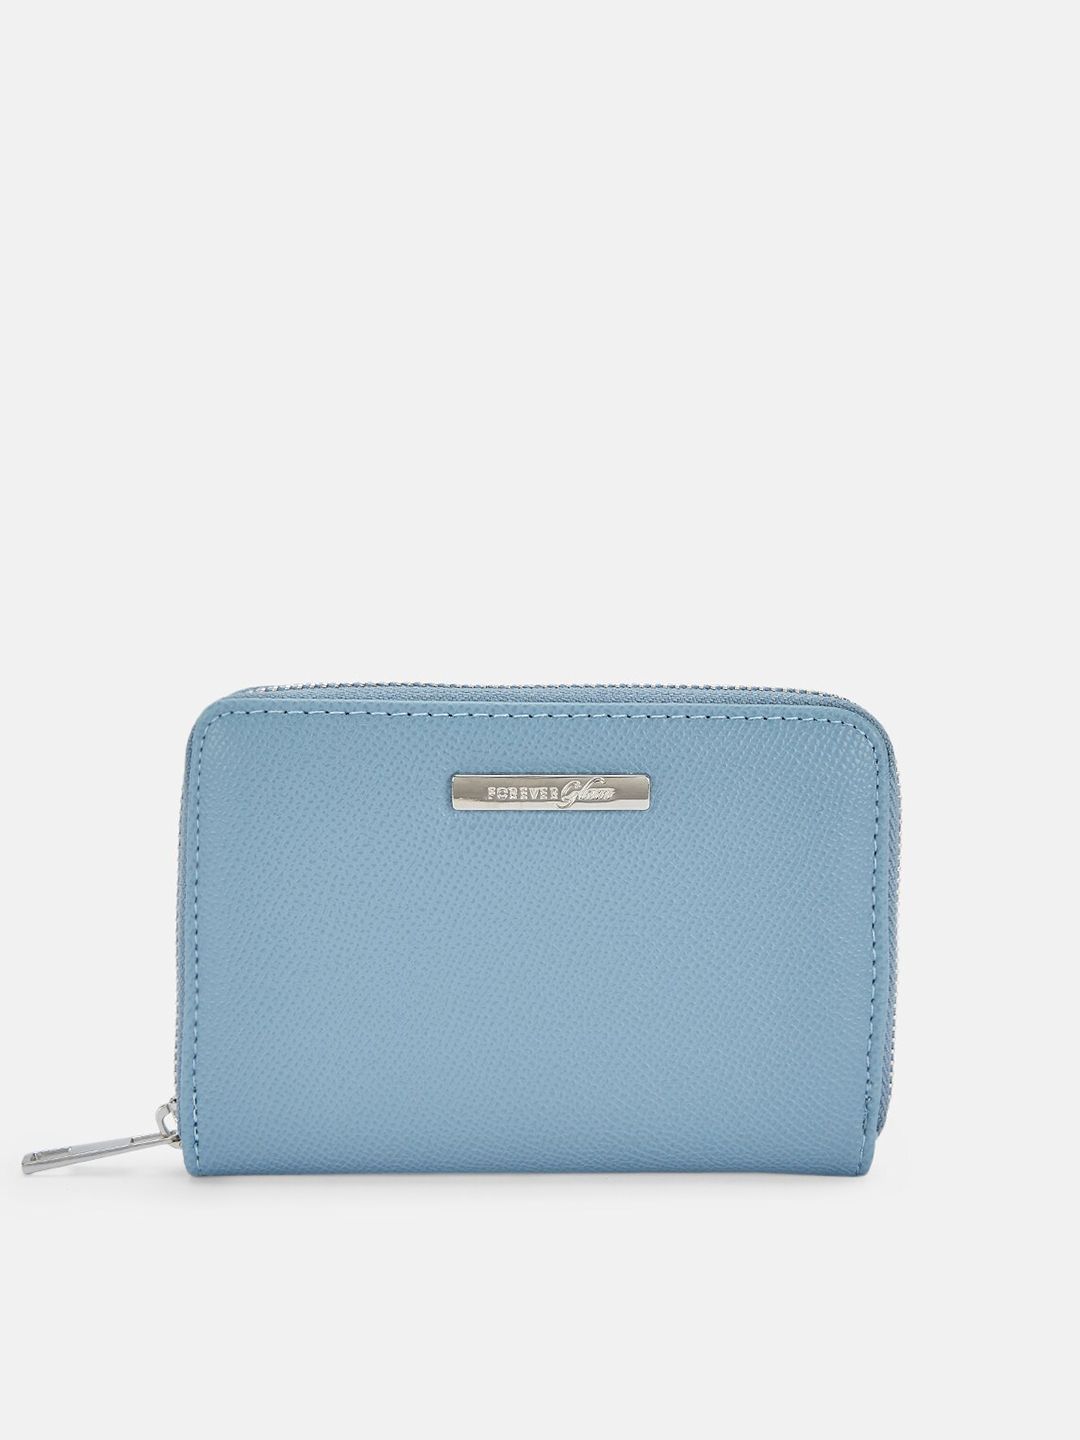 Forever Glam by Pantaloons Women Blue Textured Zip Around Wallet Price in India